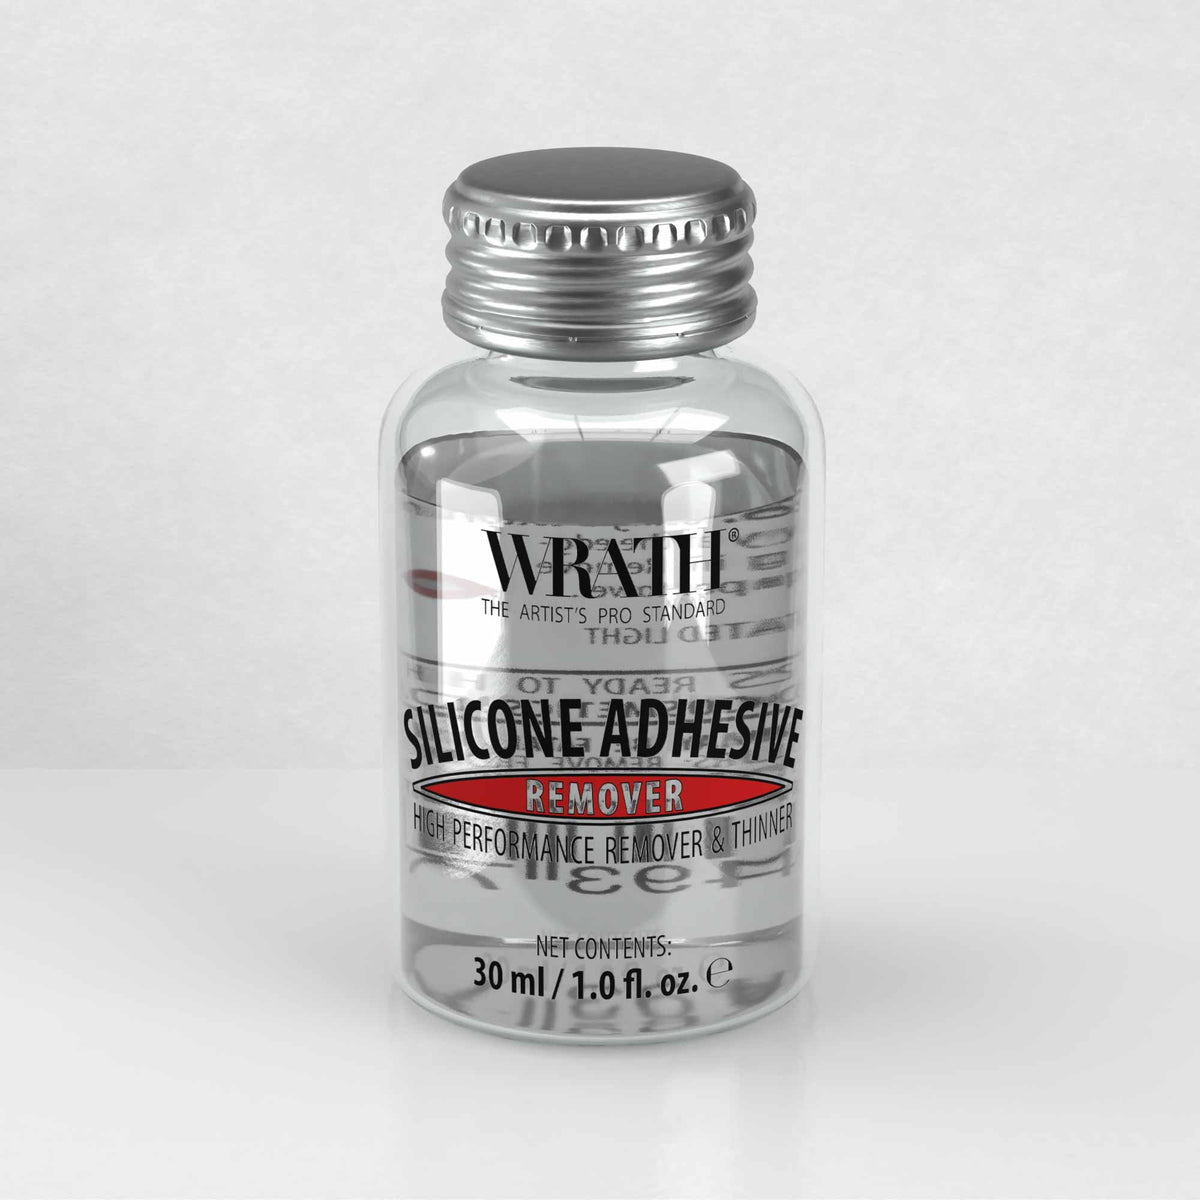 WRATH Silicone Adhesive Remover &amp; Thinner